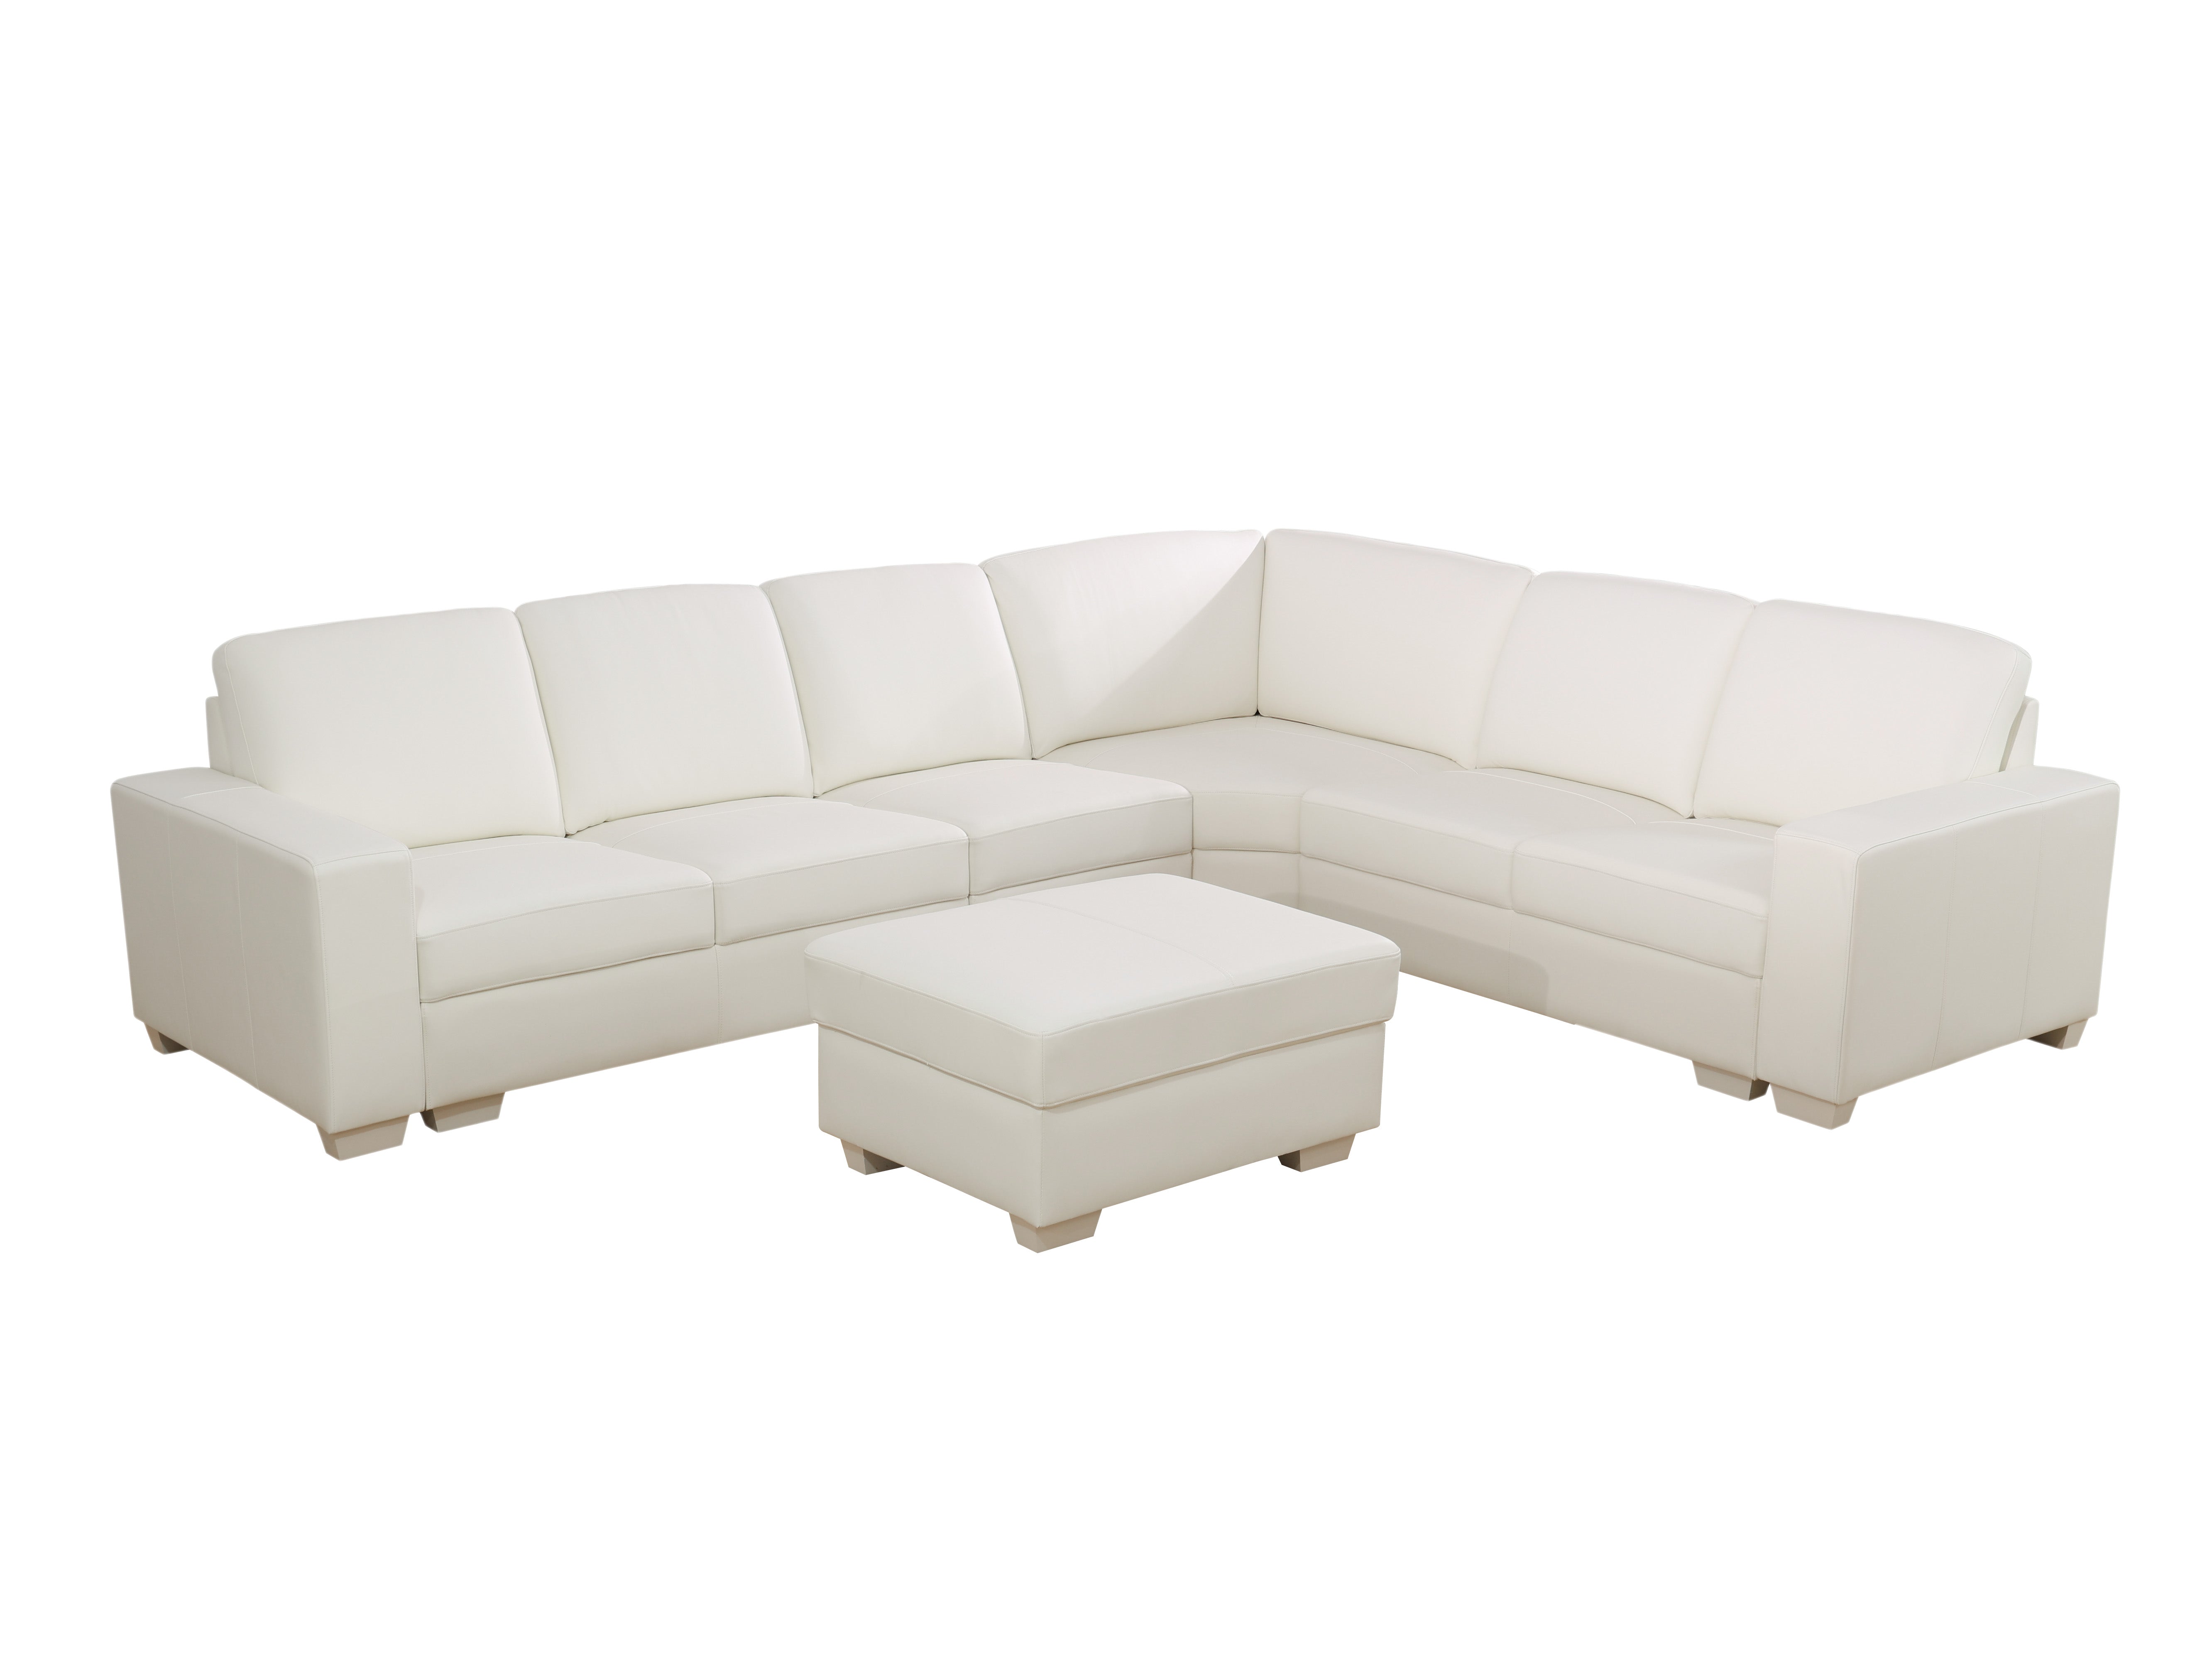 Ainehome White Cowhide Leather Combo Sofa Set